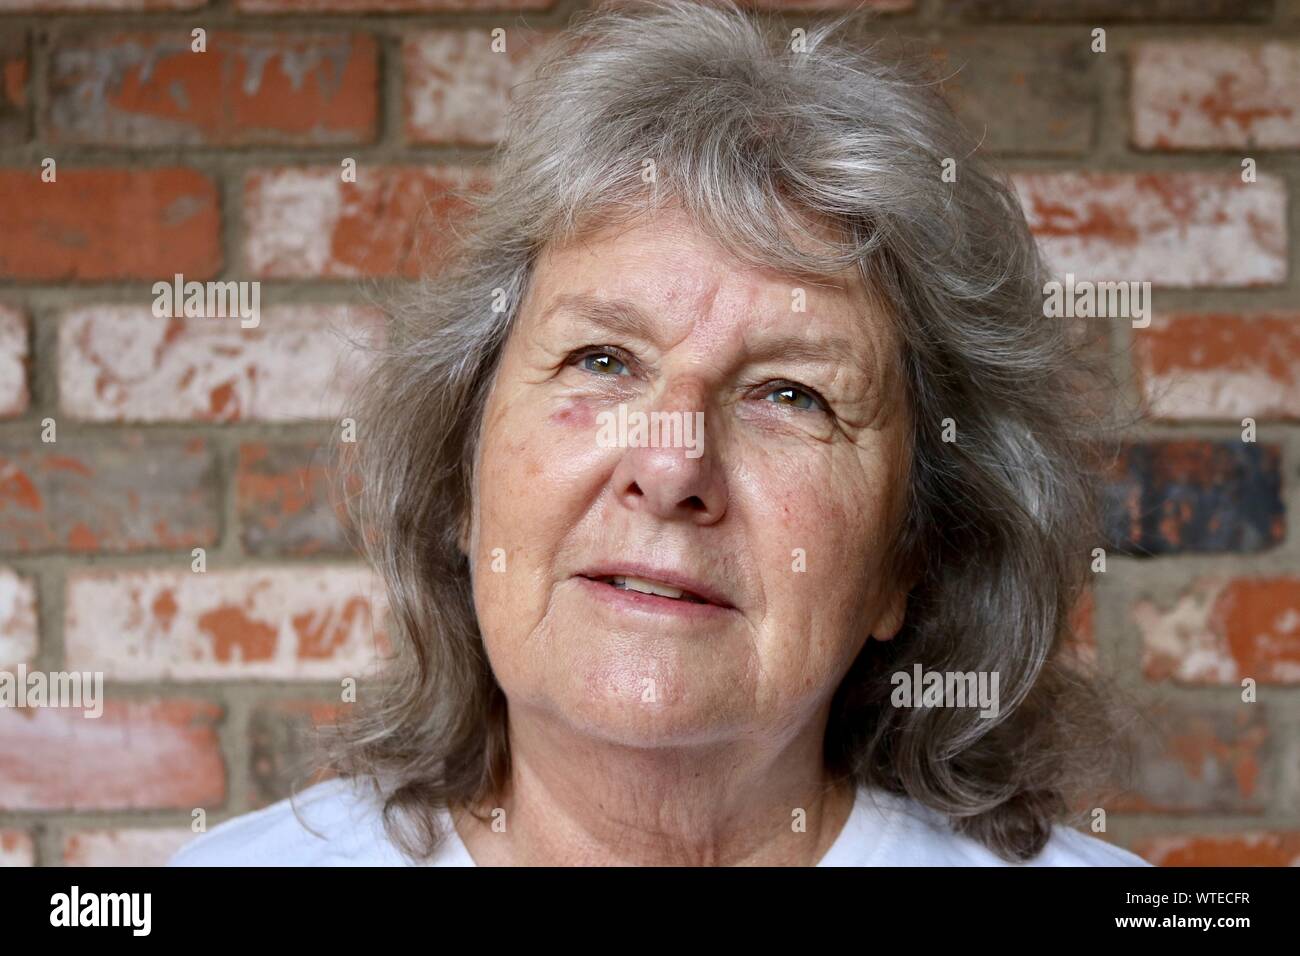 Portrait of an older woman with grey hair looking hopeful Stock Photo